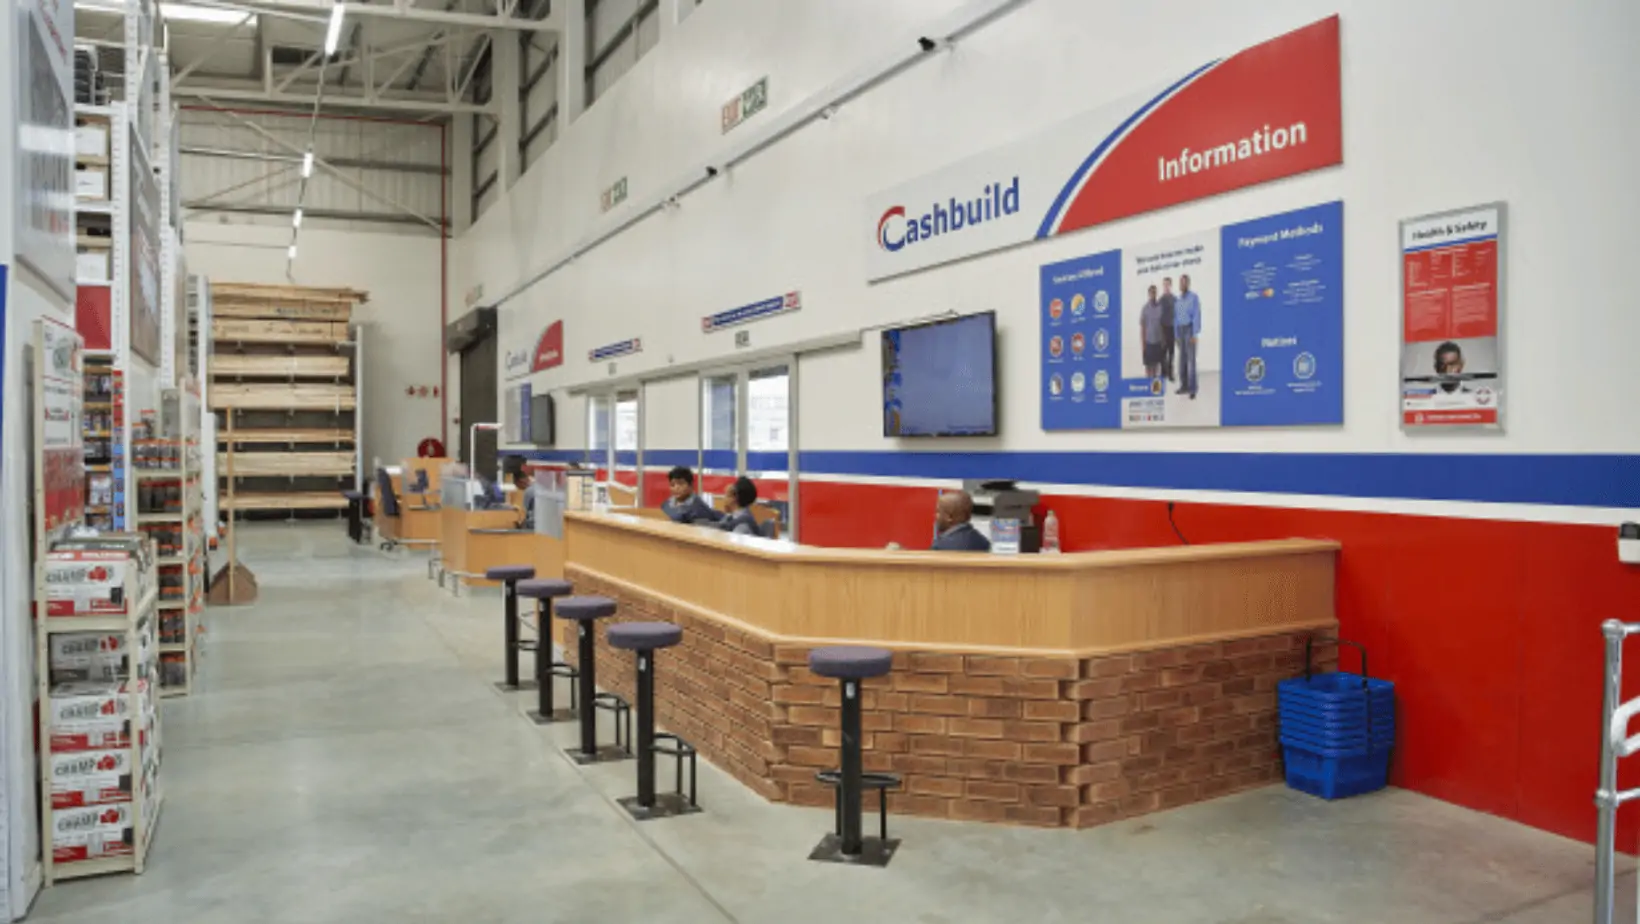 Cashbuild Limited Reports Mixed Financial Results for Interim Period